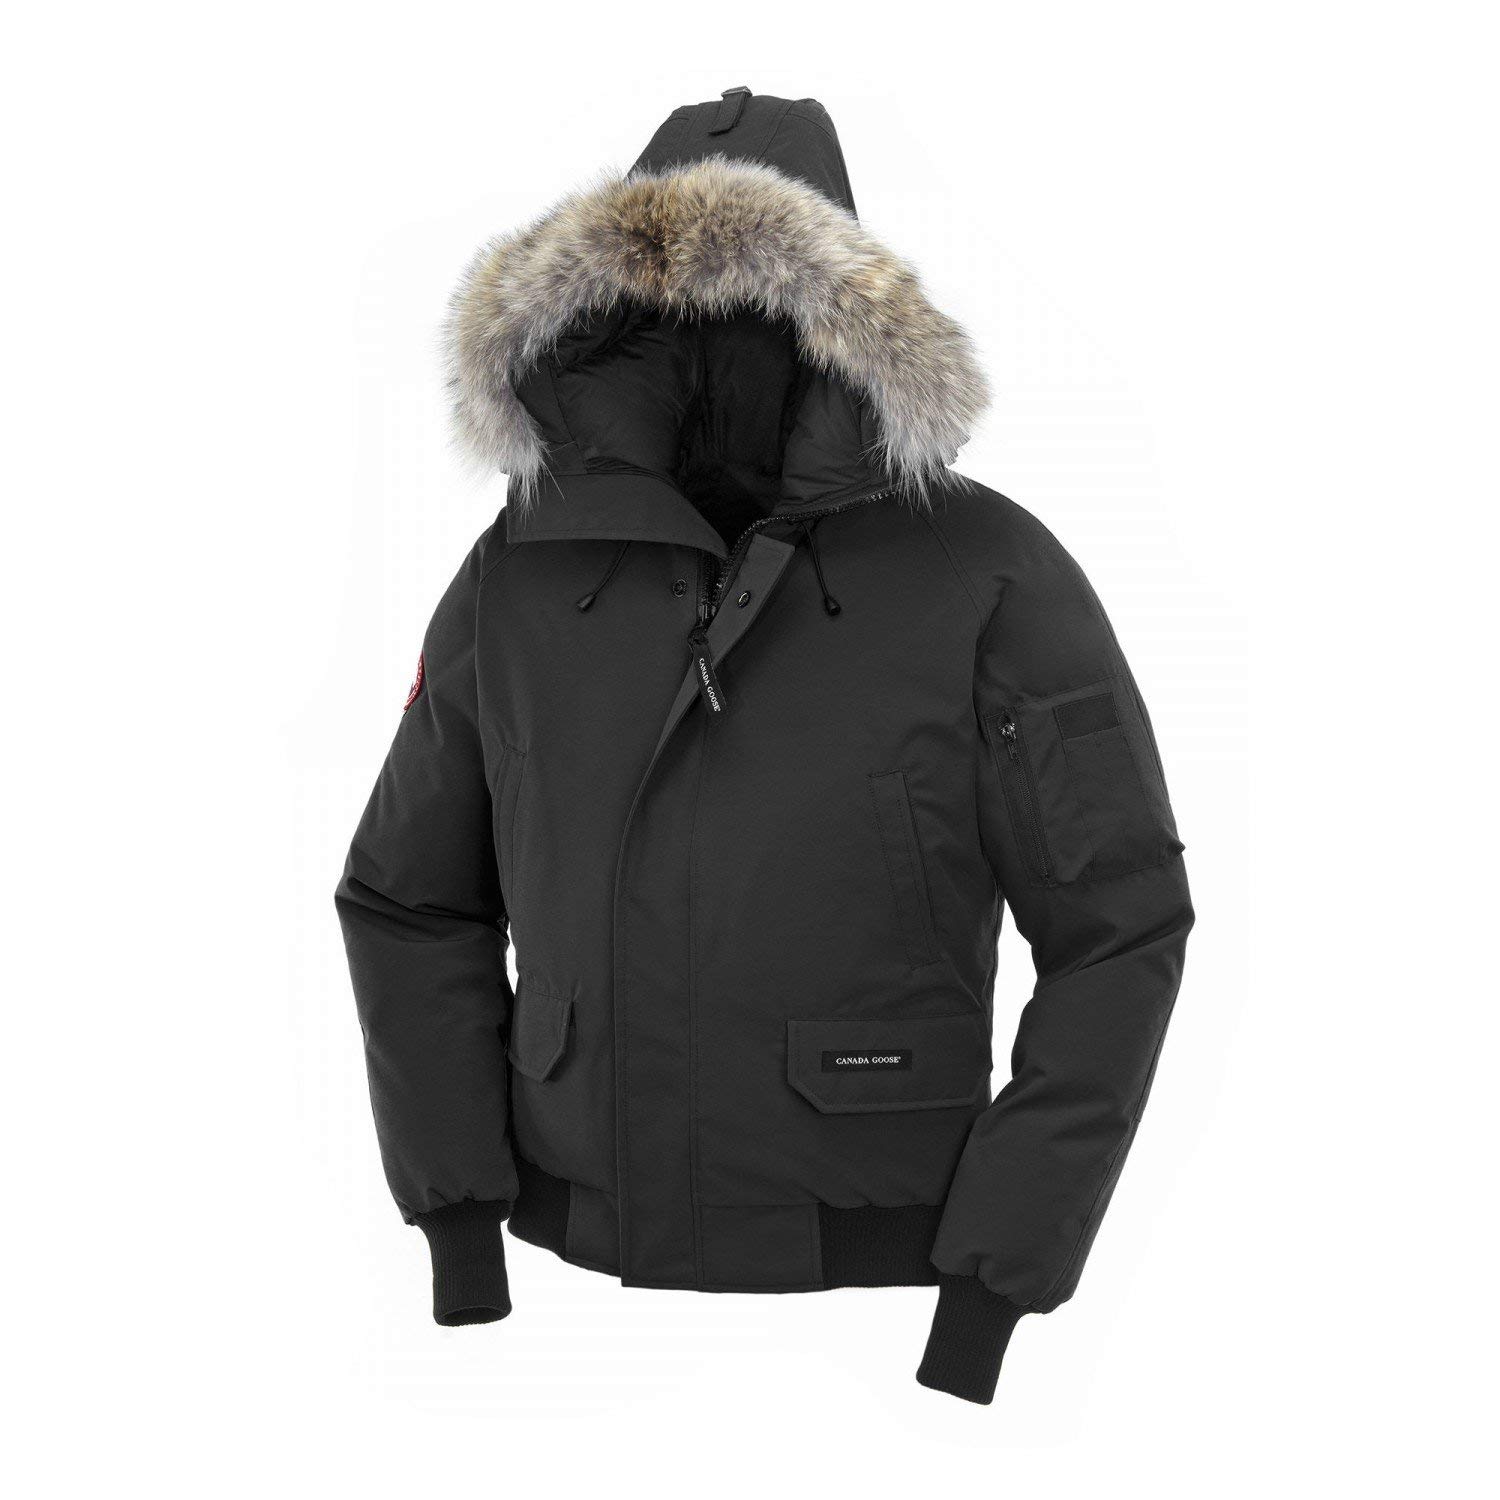 Best Canada Goose Jackets Reviewed & Rated for Quality - TheGearHunt